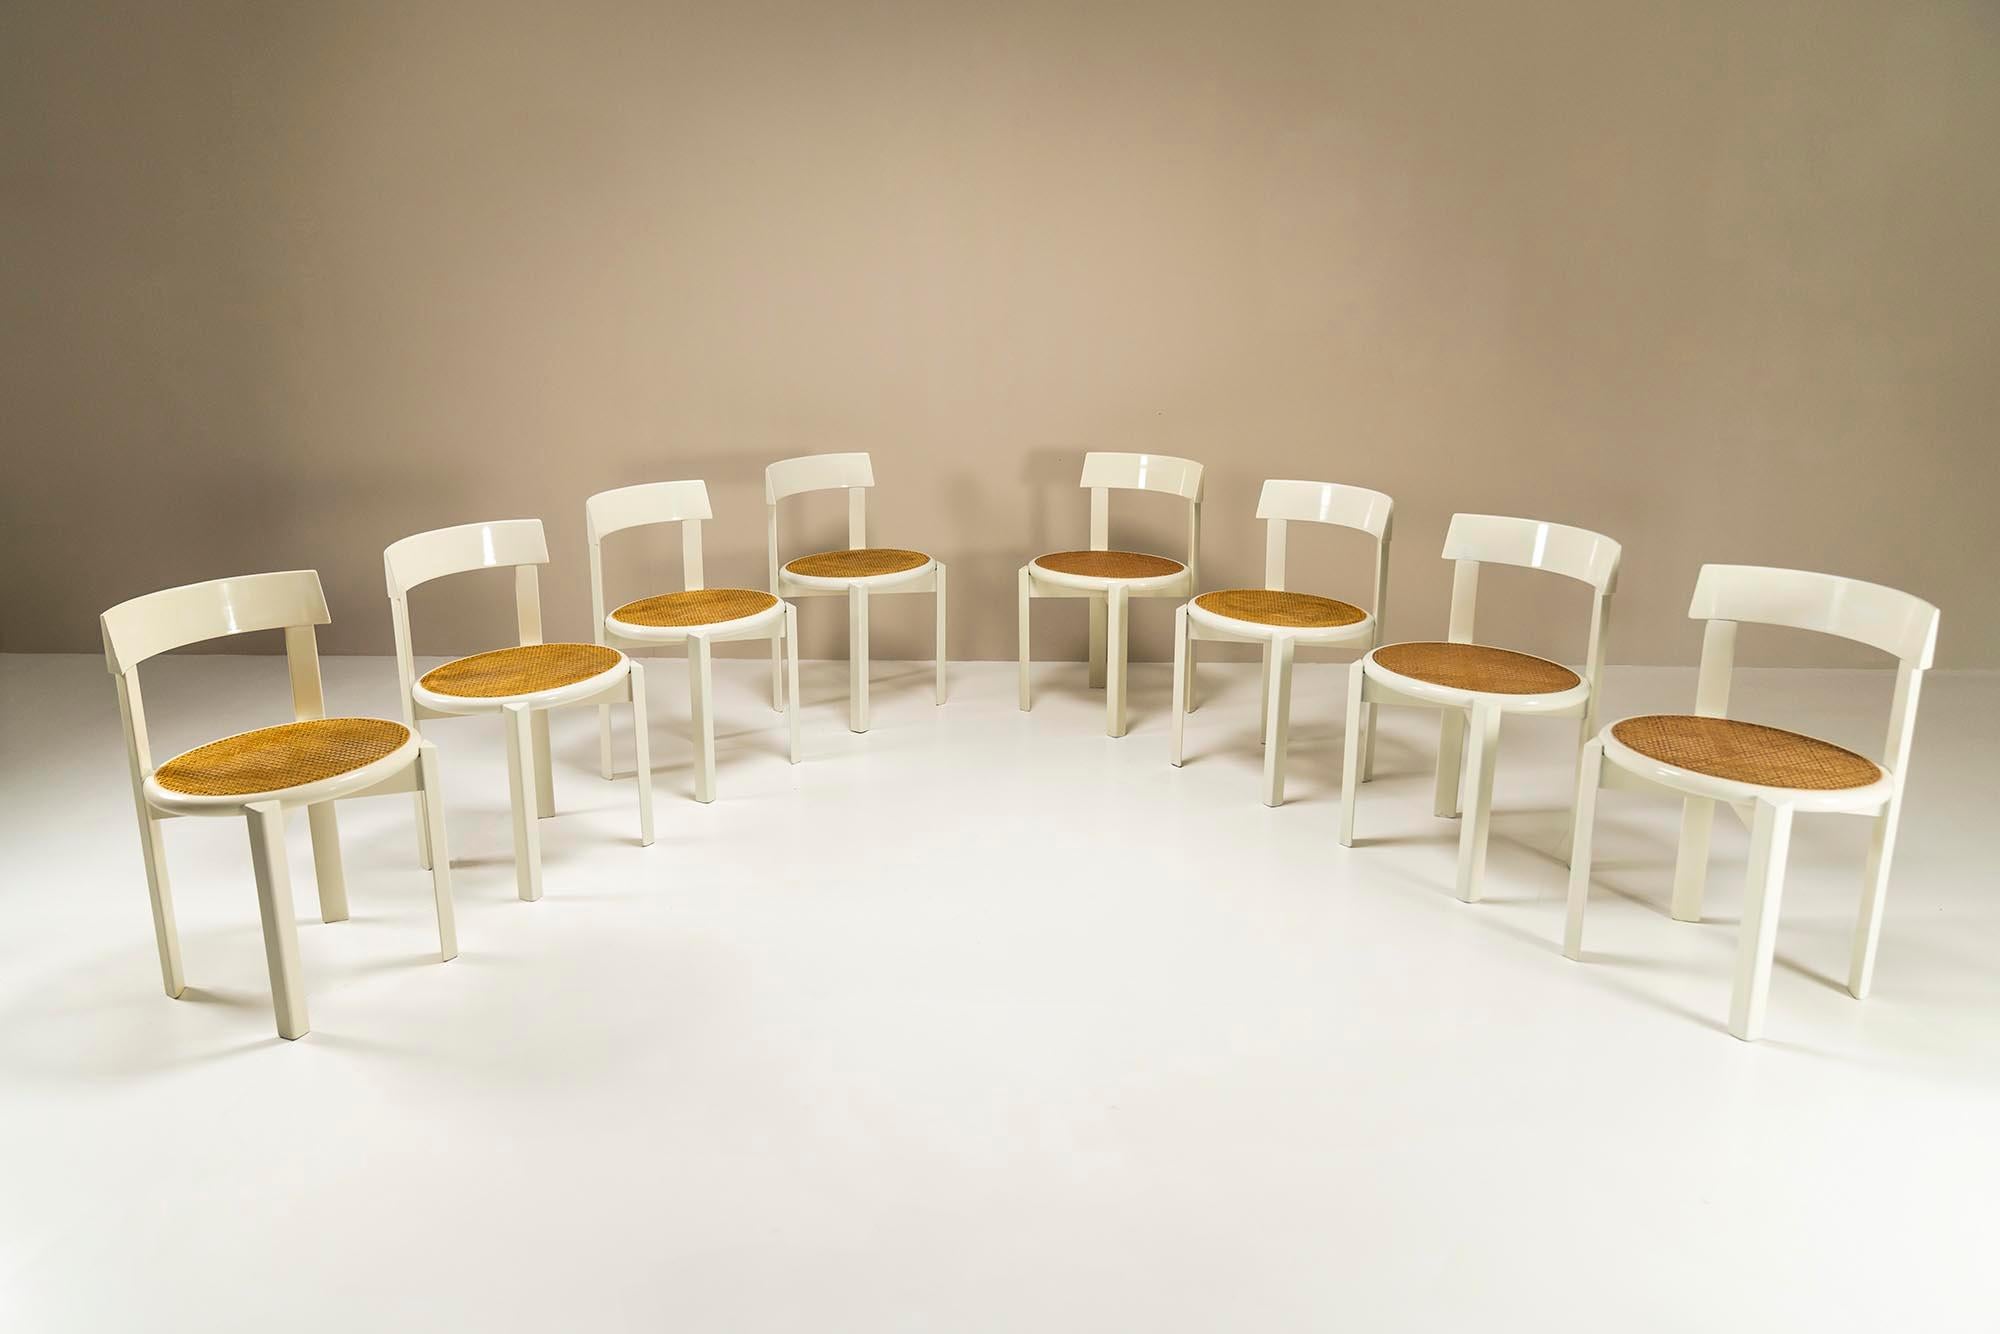 Set of 8 dining chairs in white lacquered wood and wicker. This set of eight chairs is a real pleasure to look at and their design gives an airiness to any interior. They were produced in the Italy of the 1970s and where at first glance they appear